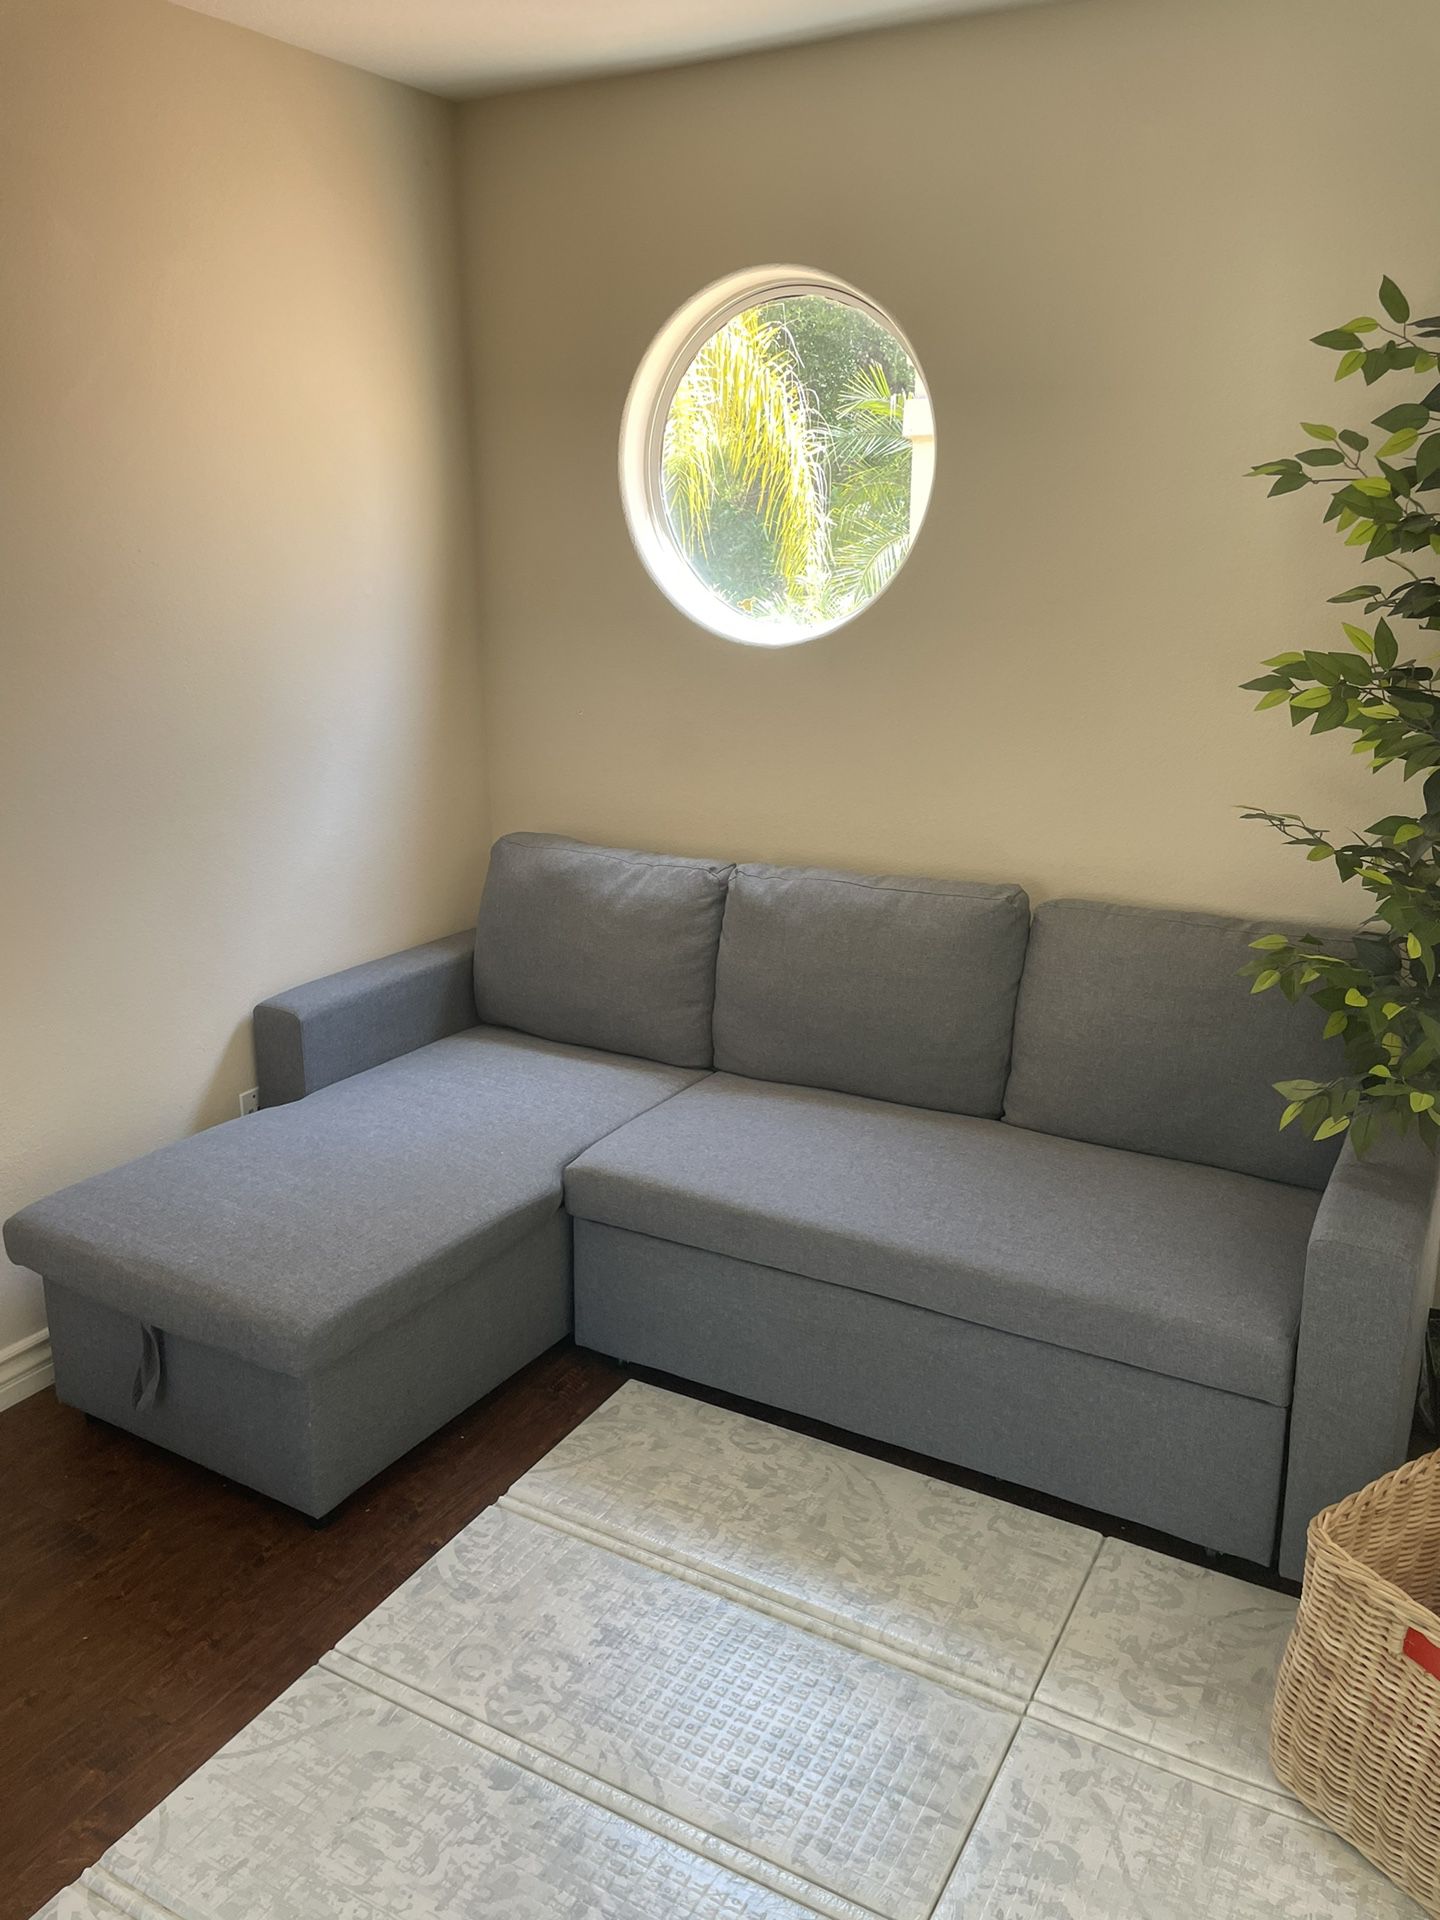 IKEA Couch/pull out bed